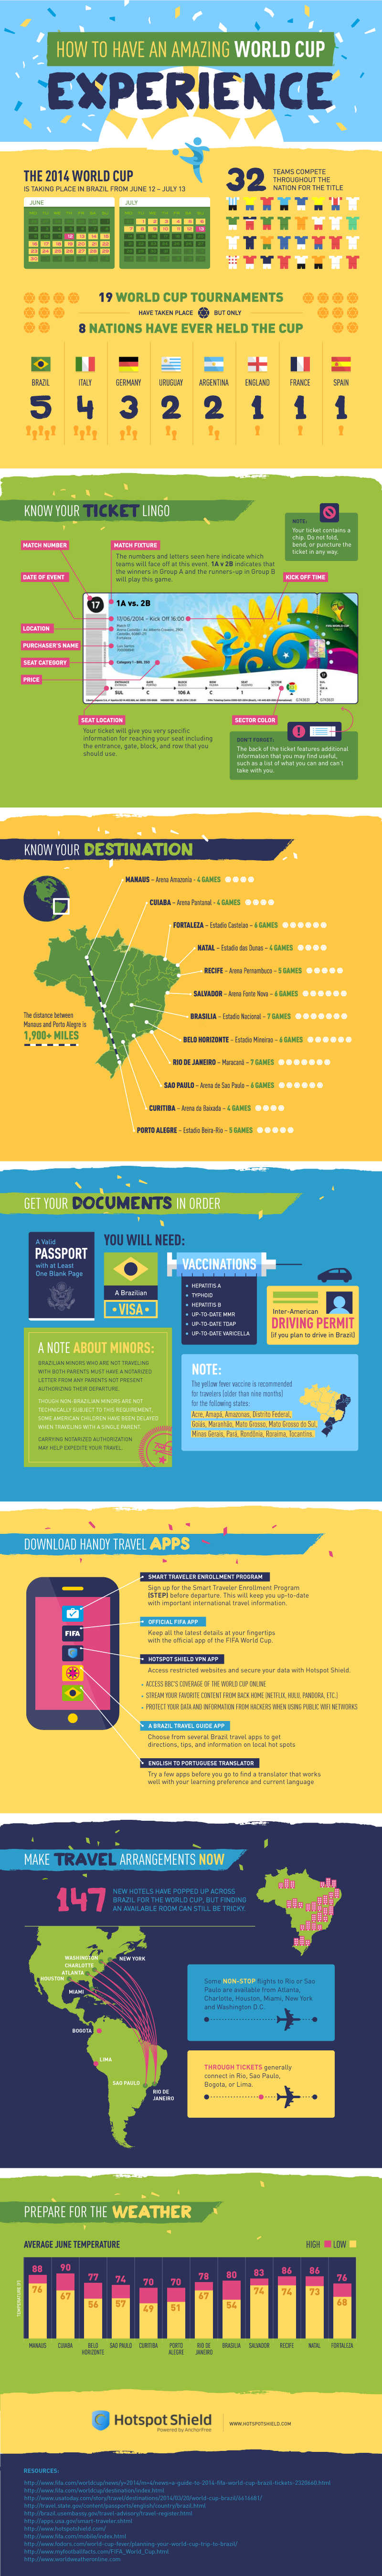 FIFA World Cup 2014 experience [infographic]